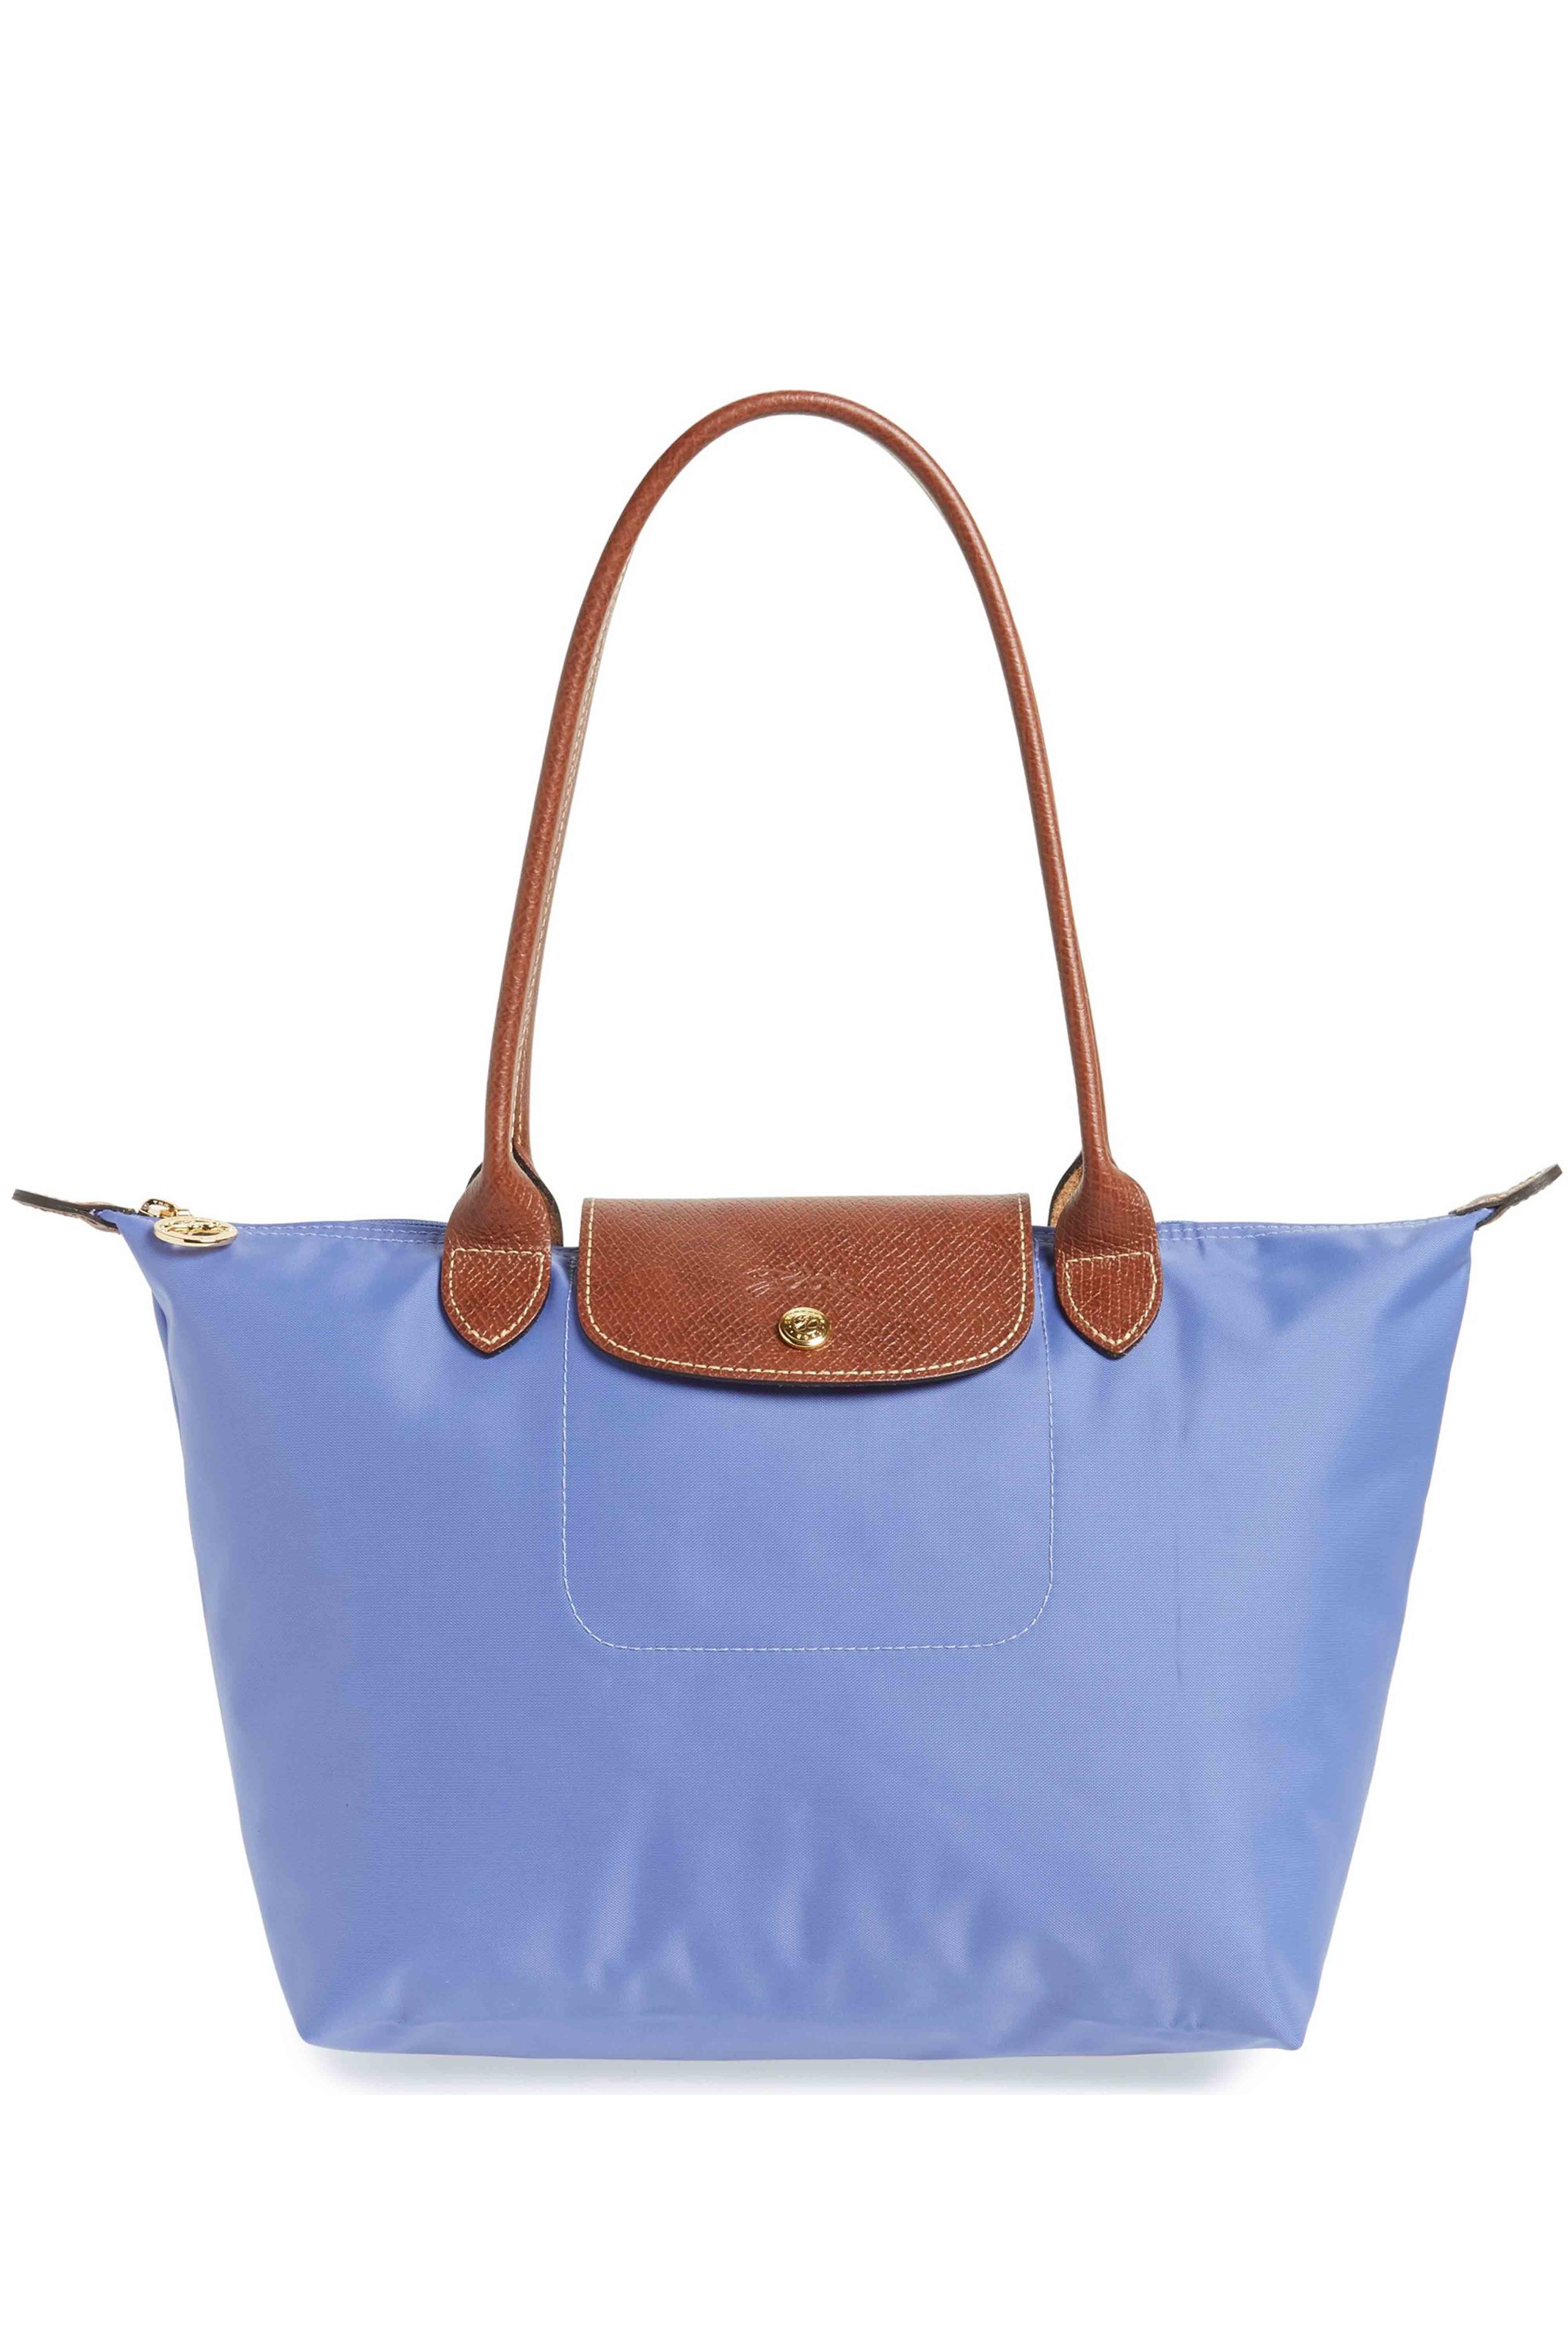 where to buy longchamps bags on sale